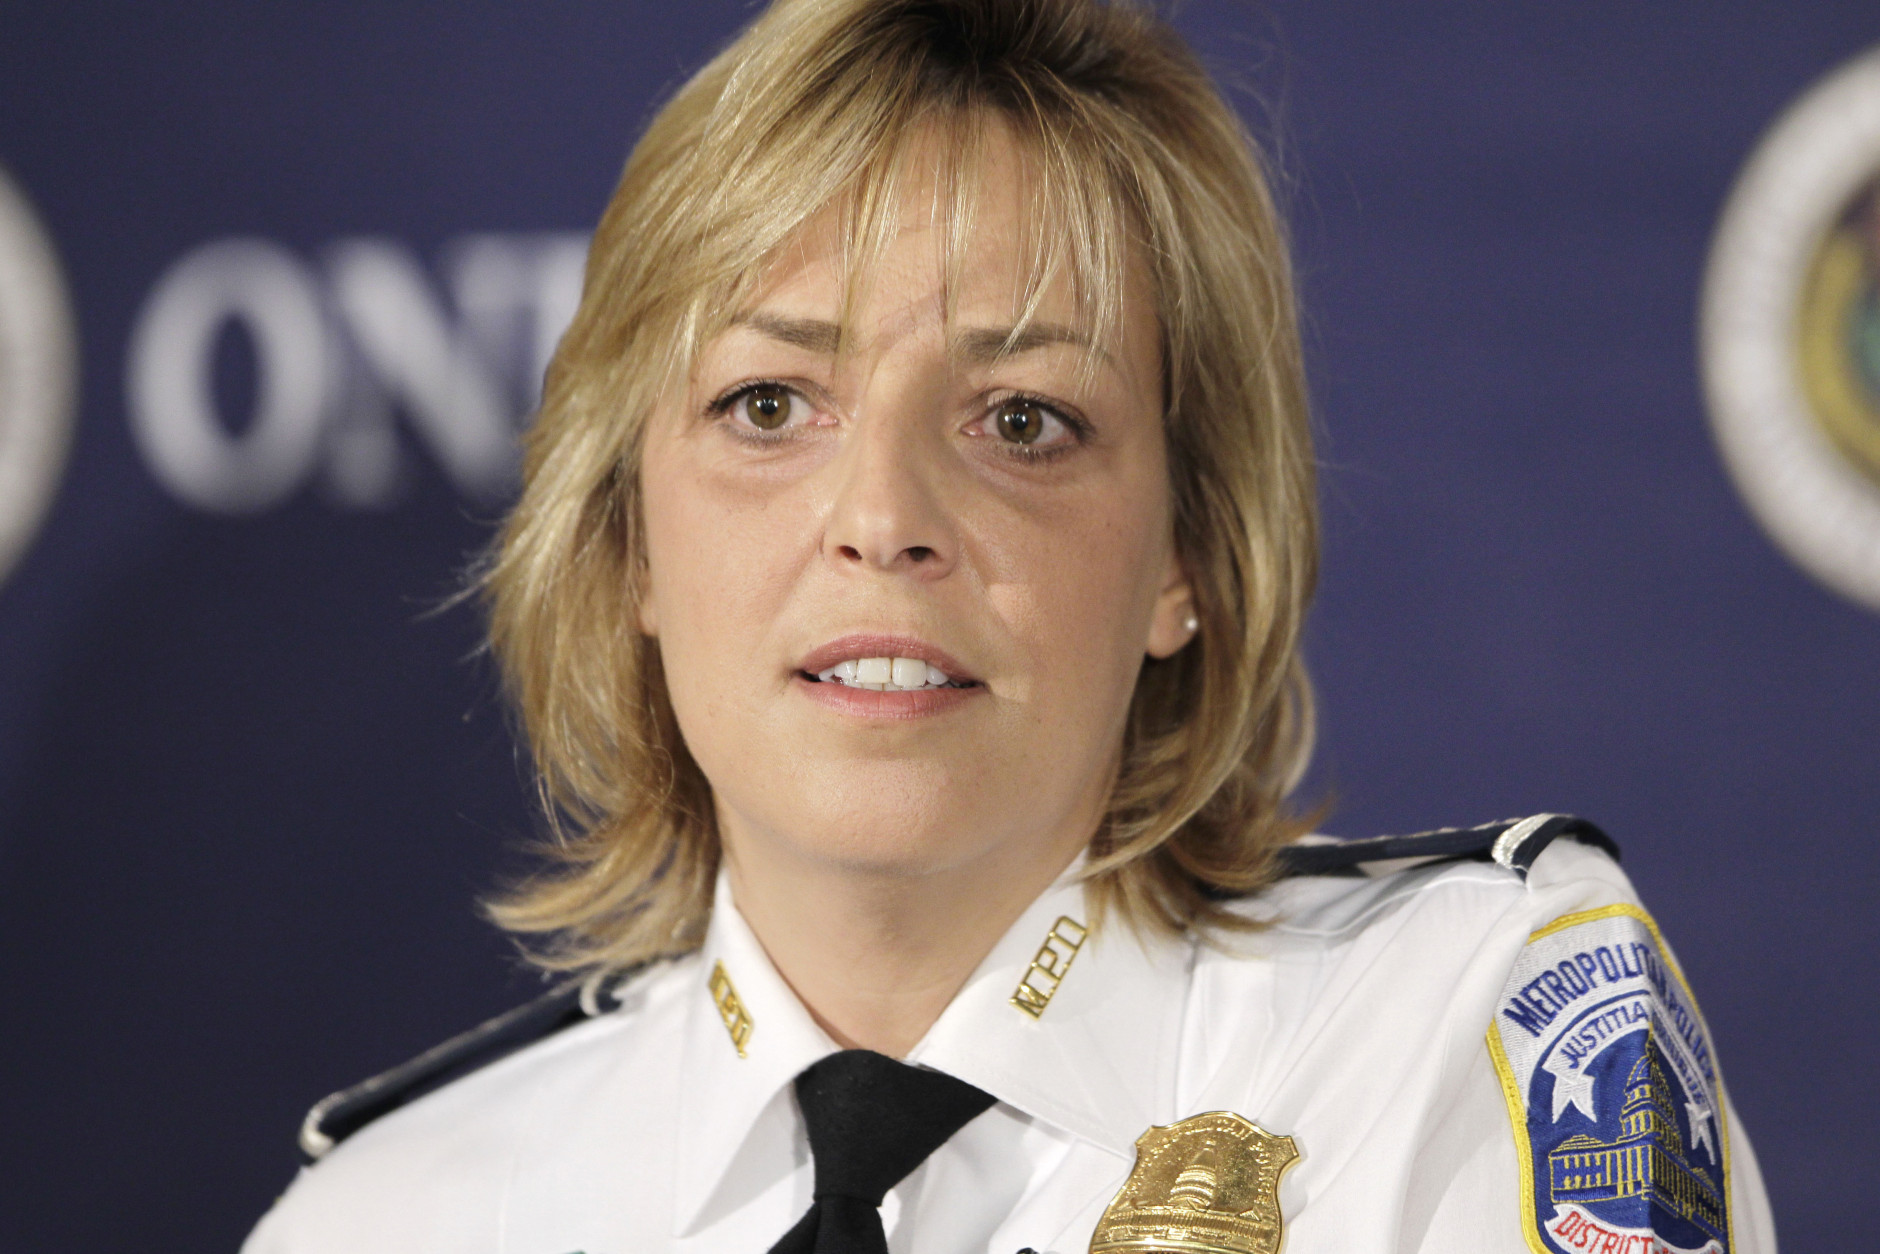 FILE In this Nov. 30, 2010 file photo, Washington Police Chief Cathy Lanier speaks at the National Press Club in Washington. A lack of funding to hire new officers and a projected increase in attrition has Washington police leadership concerned about the size of the force in the coming years. Lanier told The Associated Press that the department has about 200 fewer sworn officers than it did less than two years, budget problems have stalled recruiting and officers who joined the force during a hiring surge about 25 years ago are preparing to retire en masse.  (AP Photo/Charles Dharapak, File)